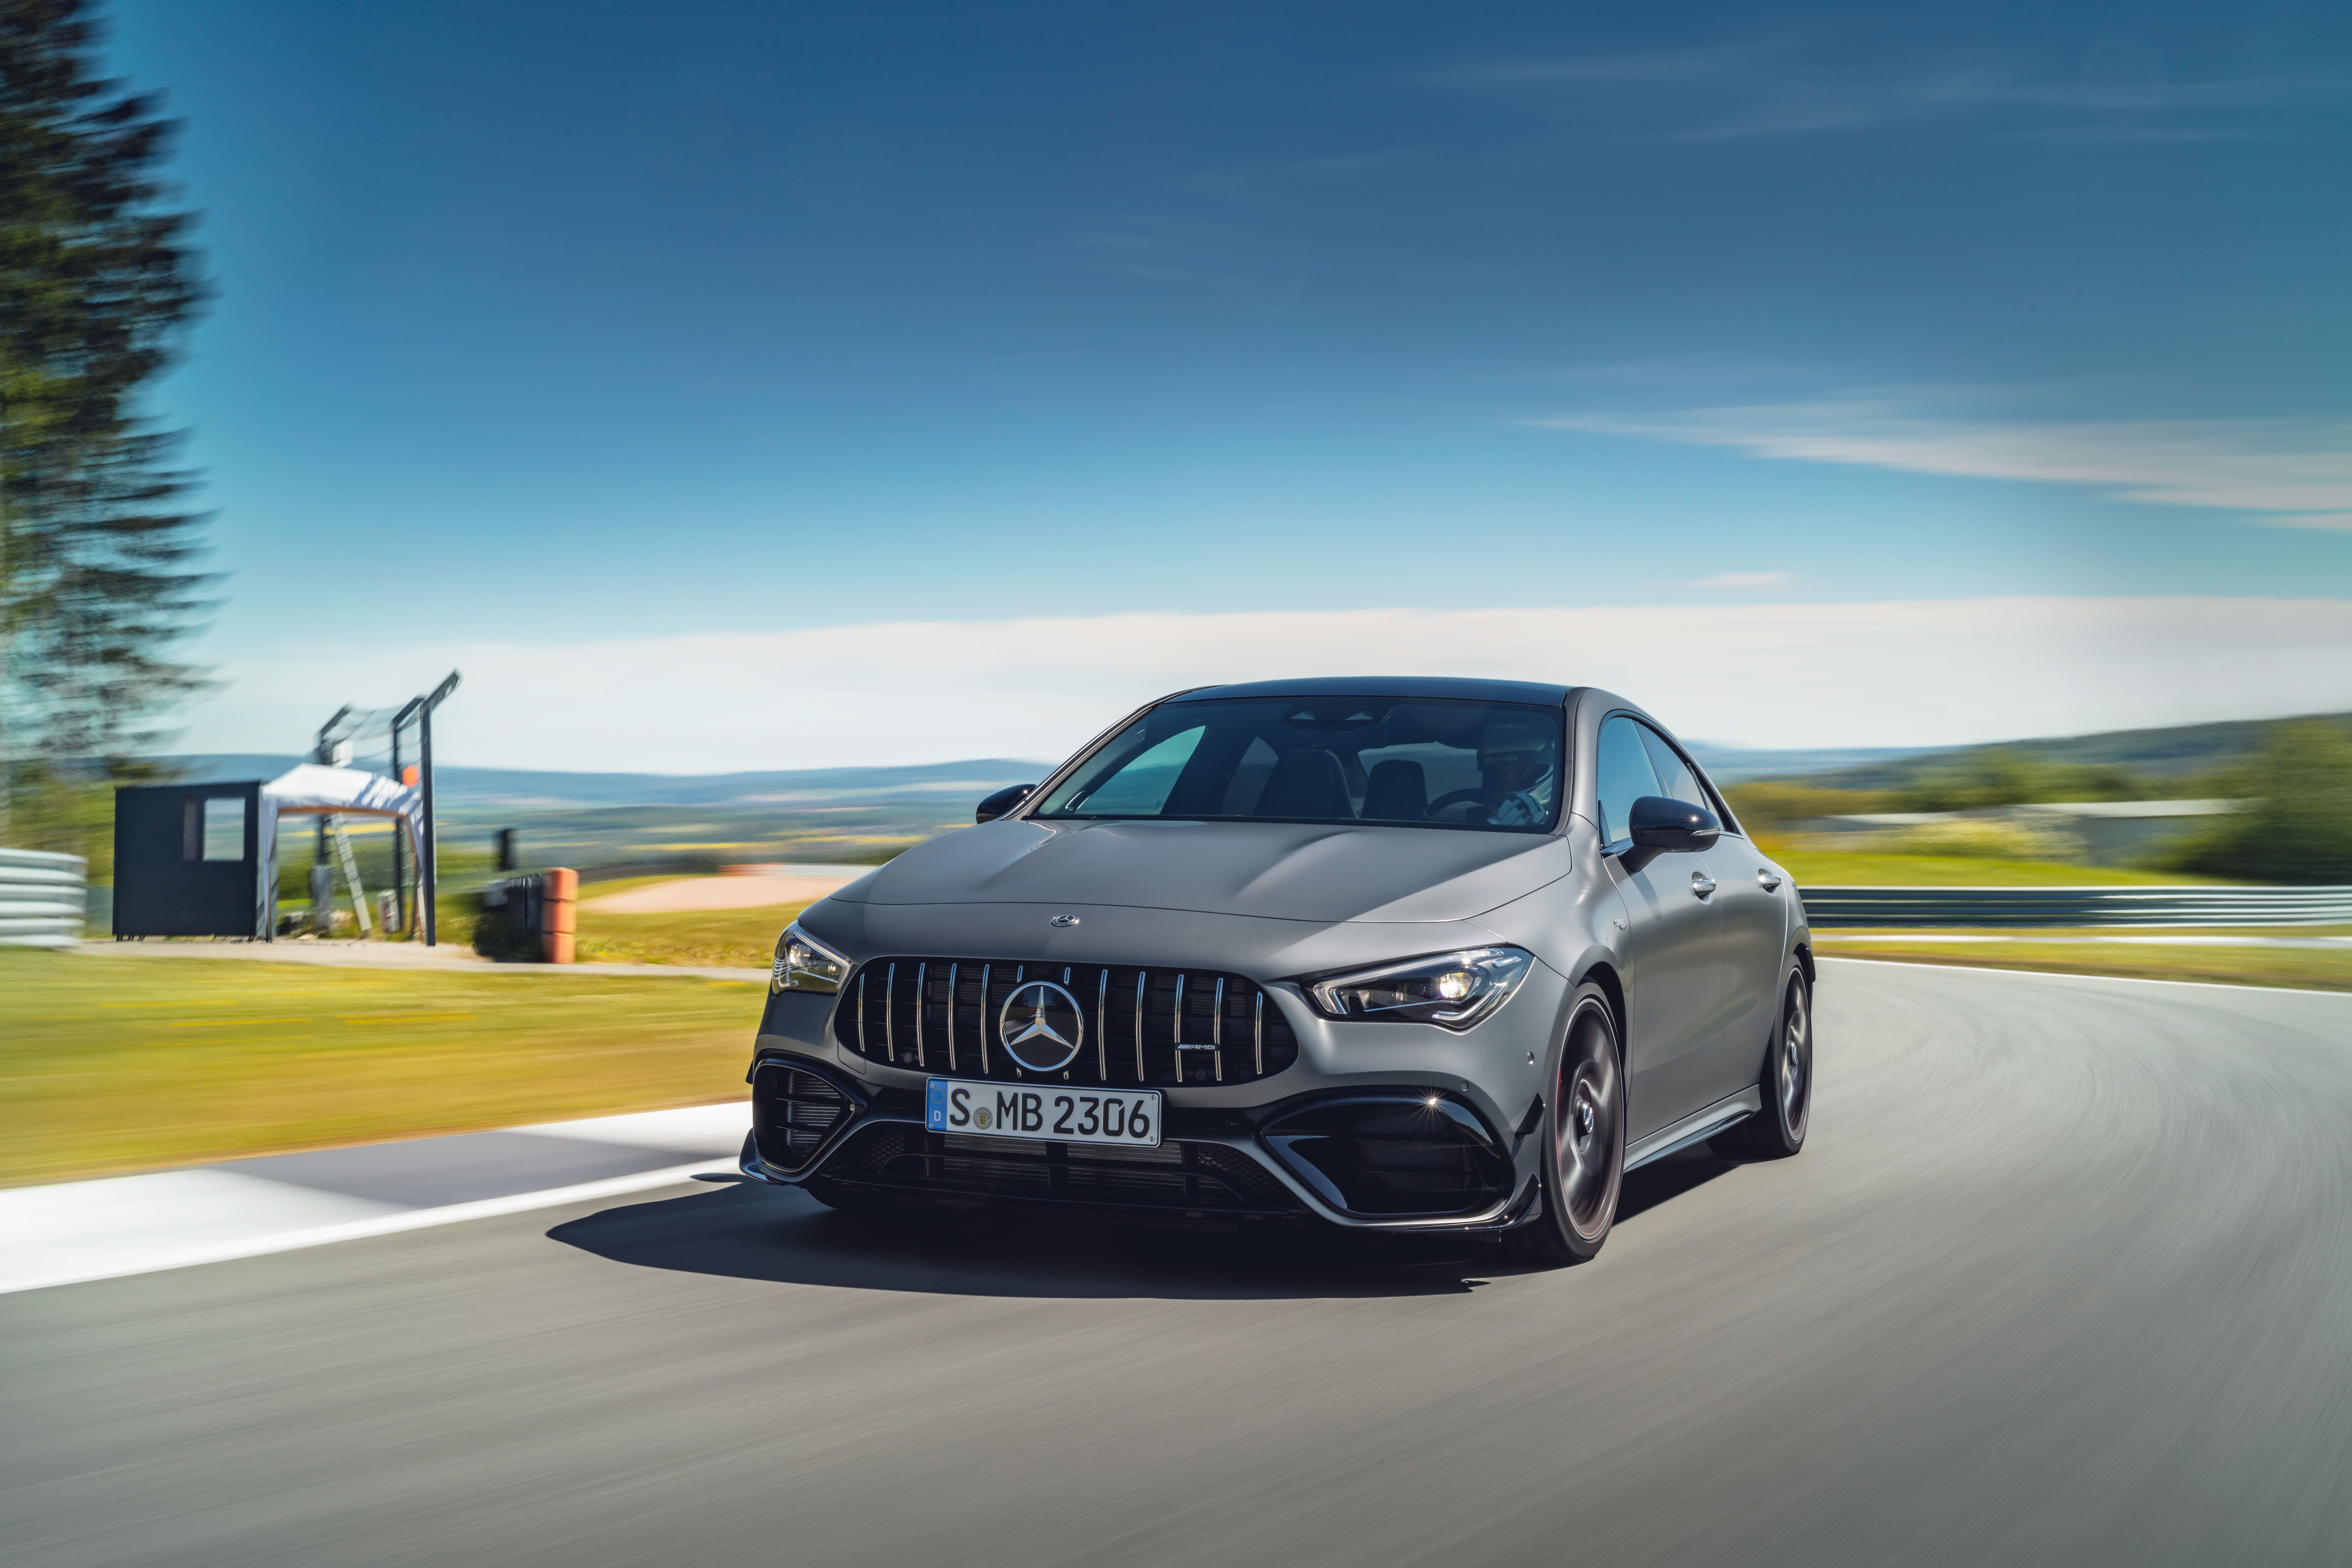 2020 Mercedes-AMG CLA45 – 382-HP Compact Four-Door Coupe